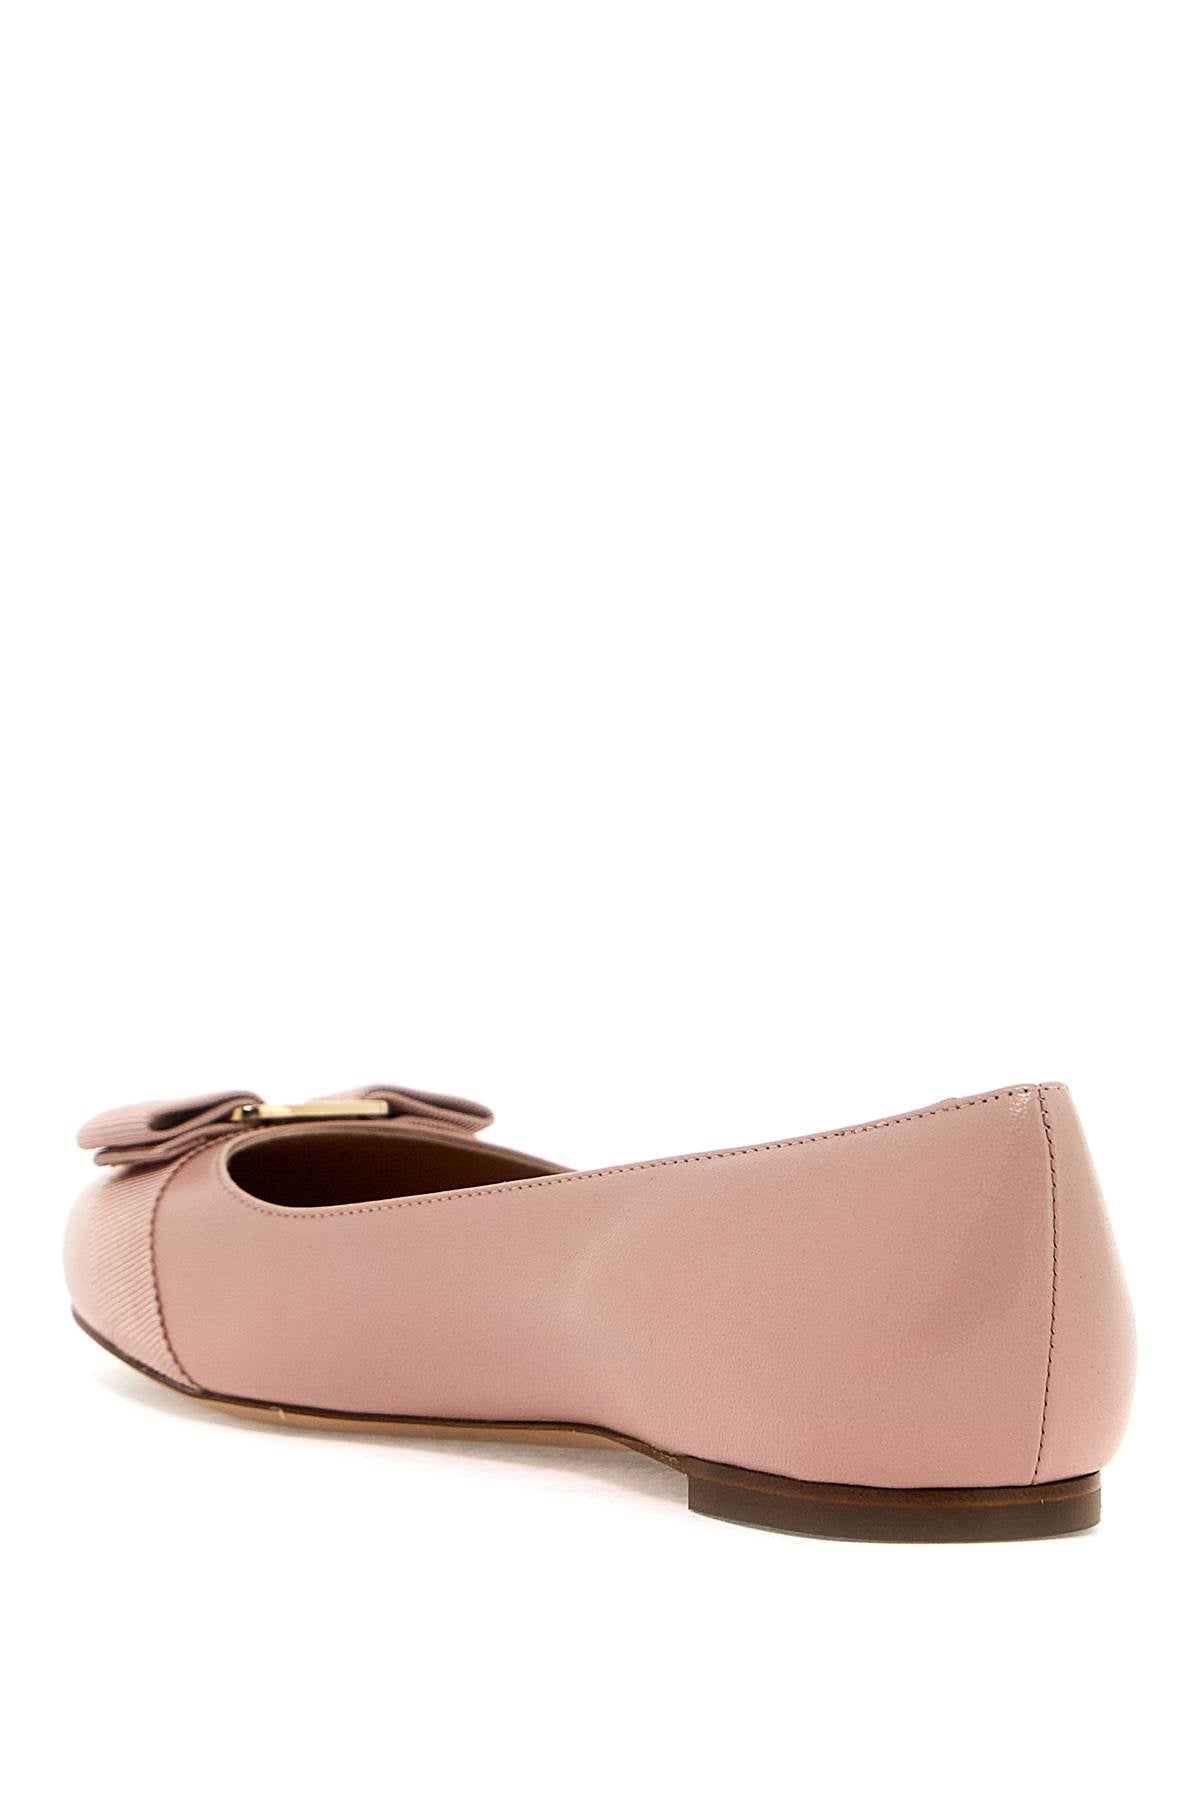 FERRAGAMO Pink Leather Ballet Flats with Iconic Bow for Women